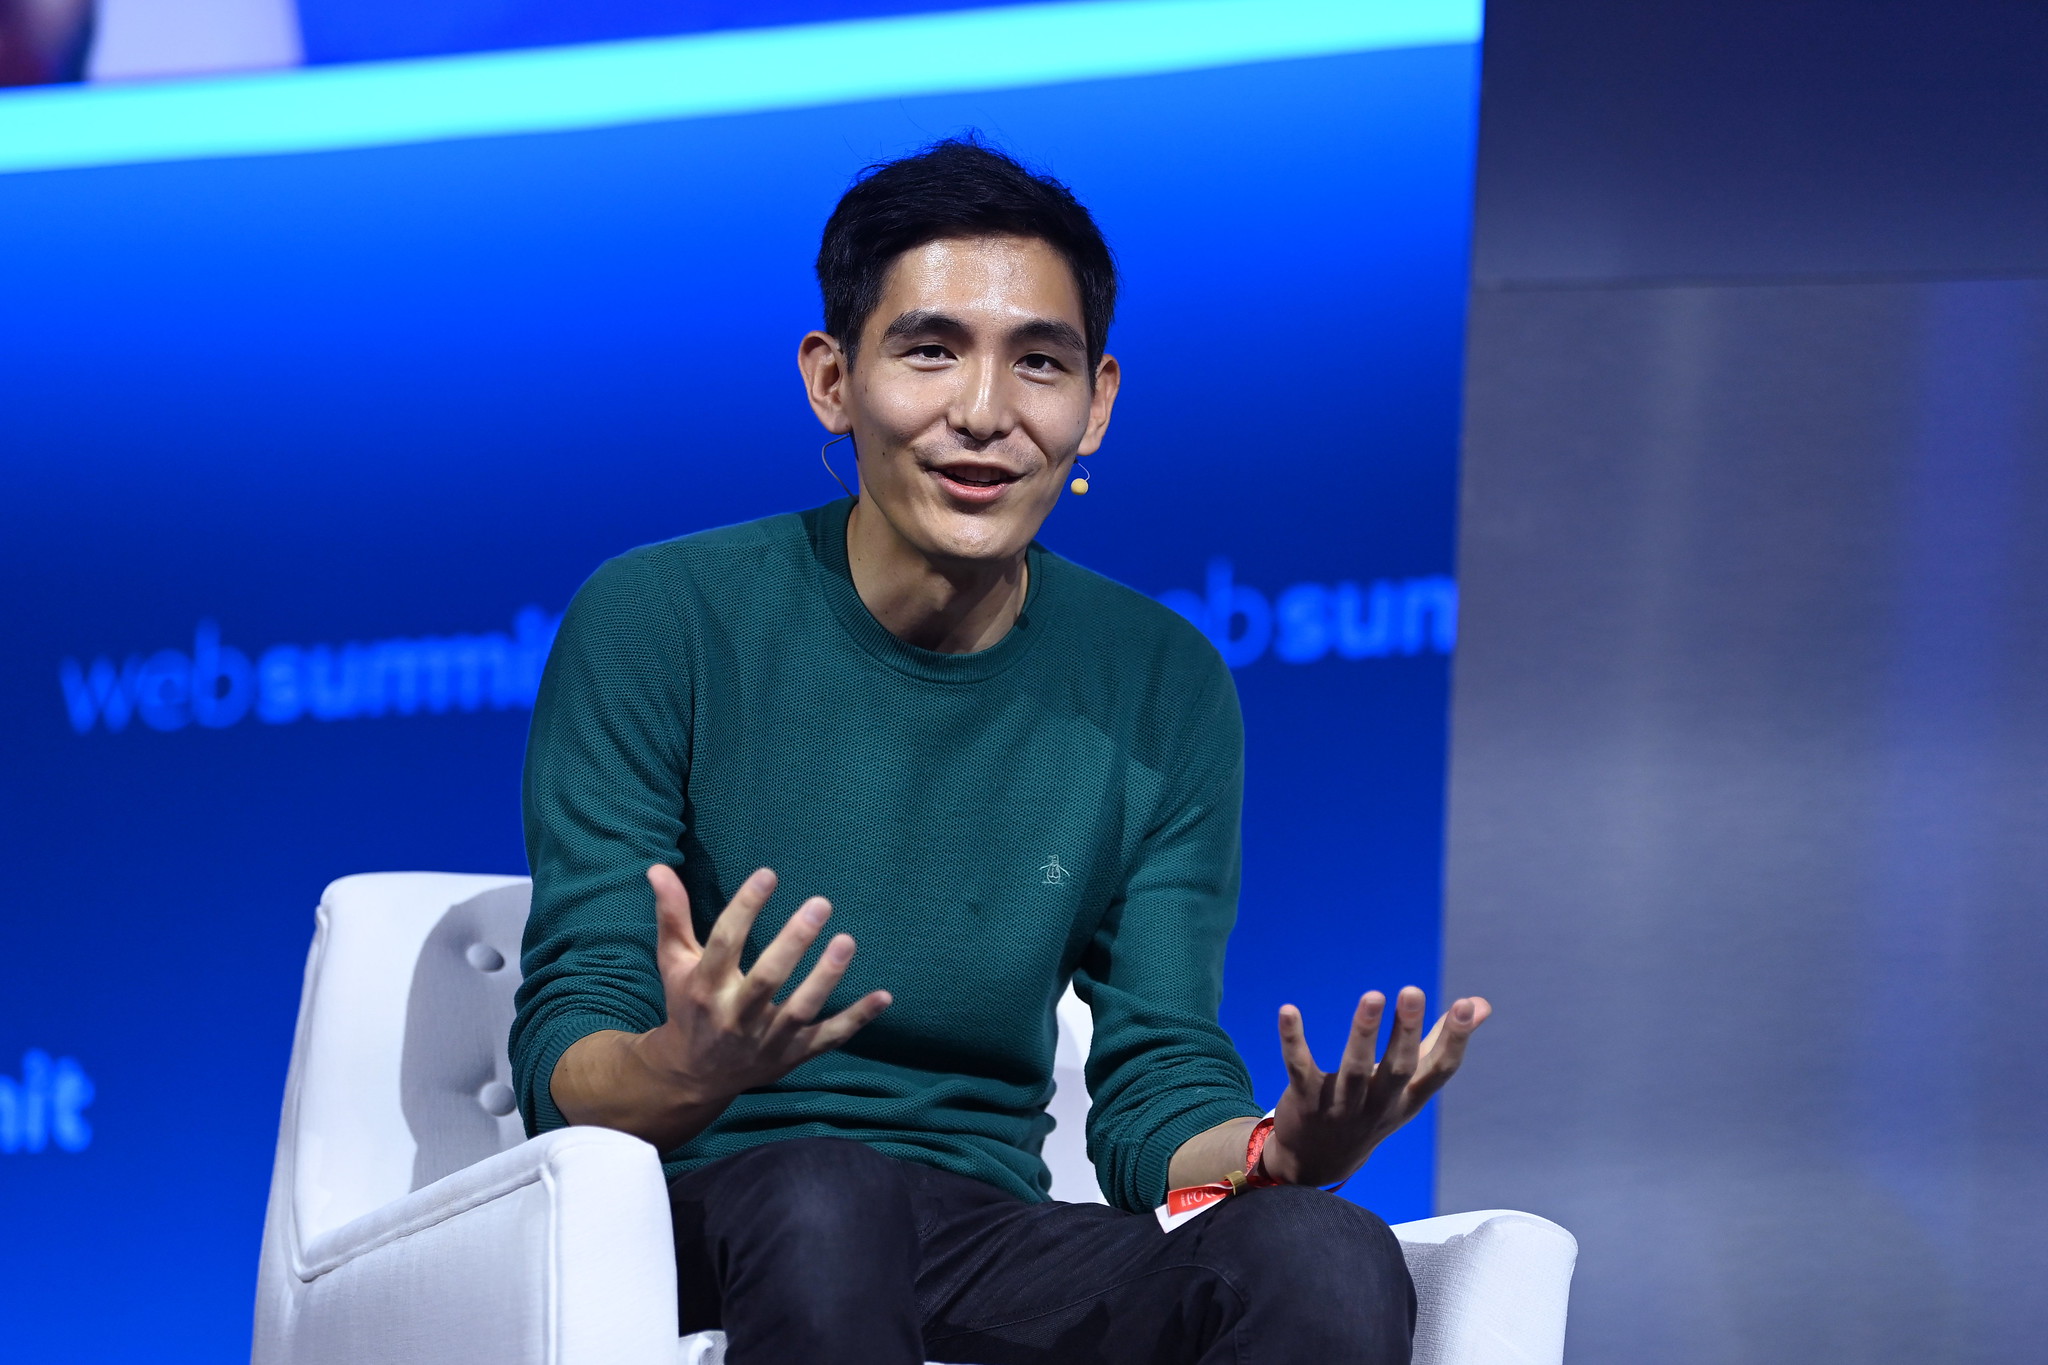 Photograph of a person (Yuhki Yamashita, chief product officer of Figma) speaking on stage at Web Summit. They are sitting on a chair and gesturing with their hands. They are wearing an on-ear microphone.